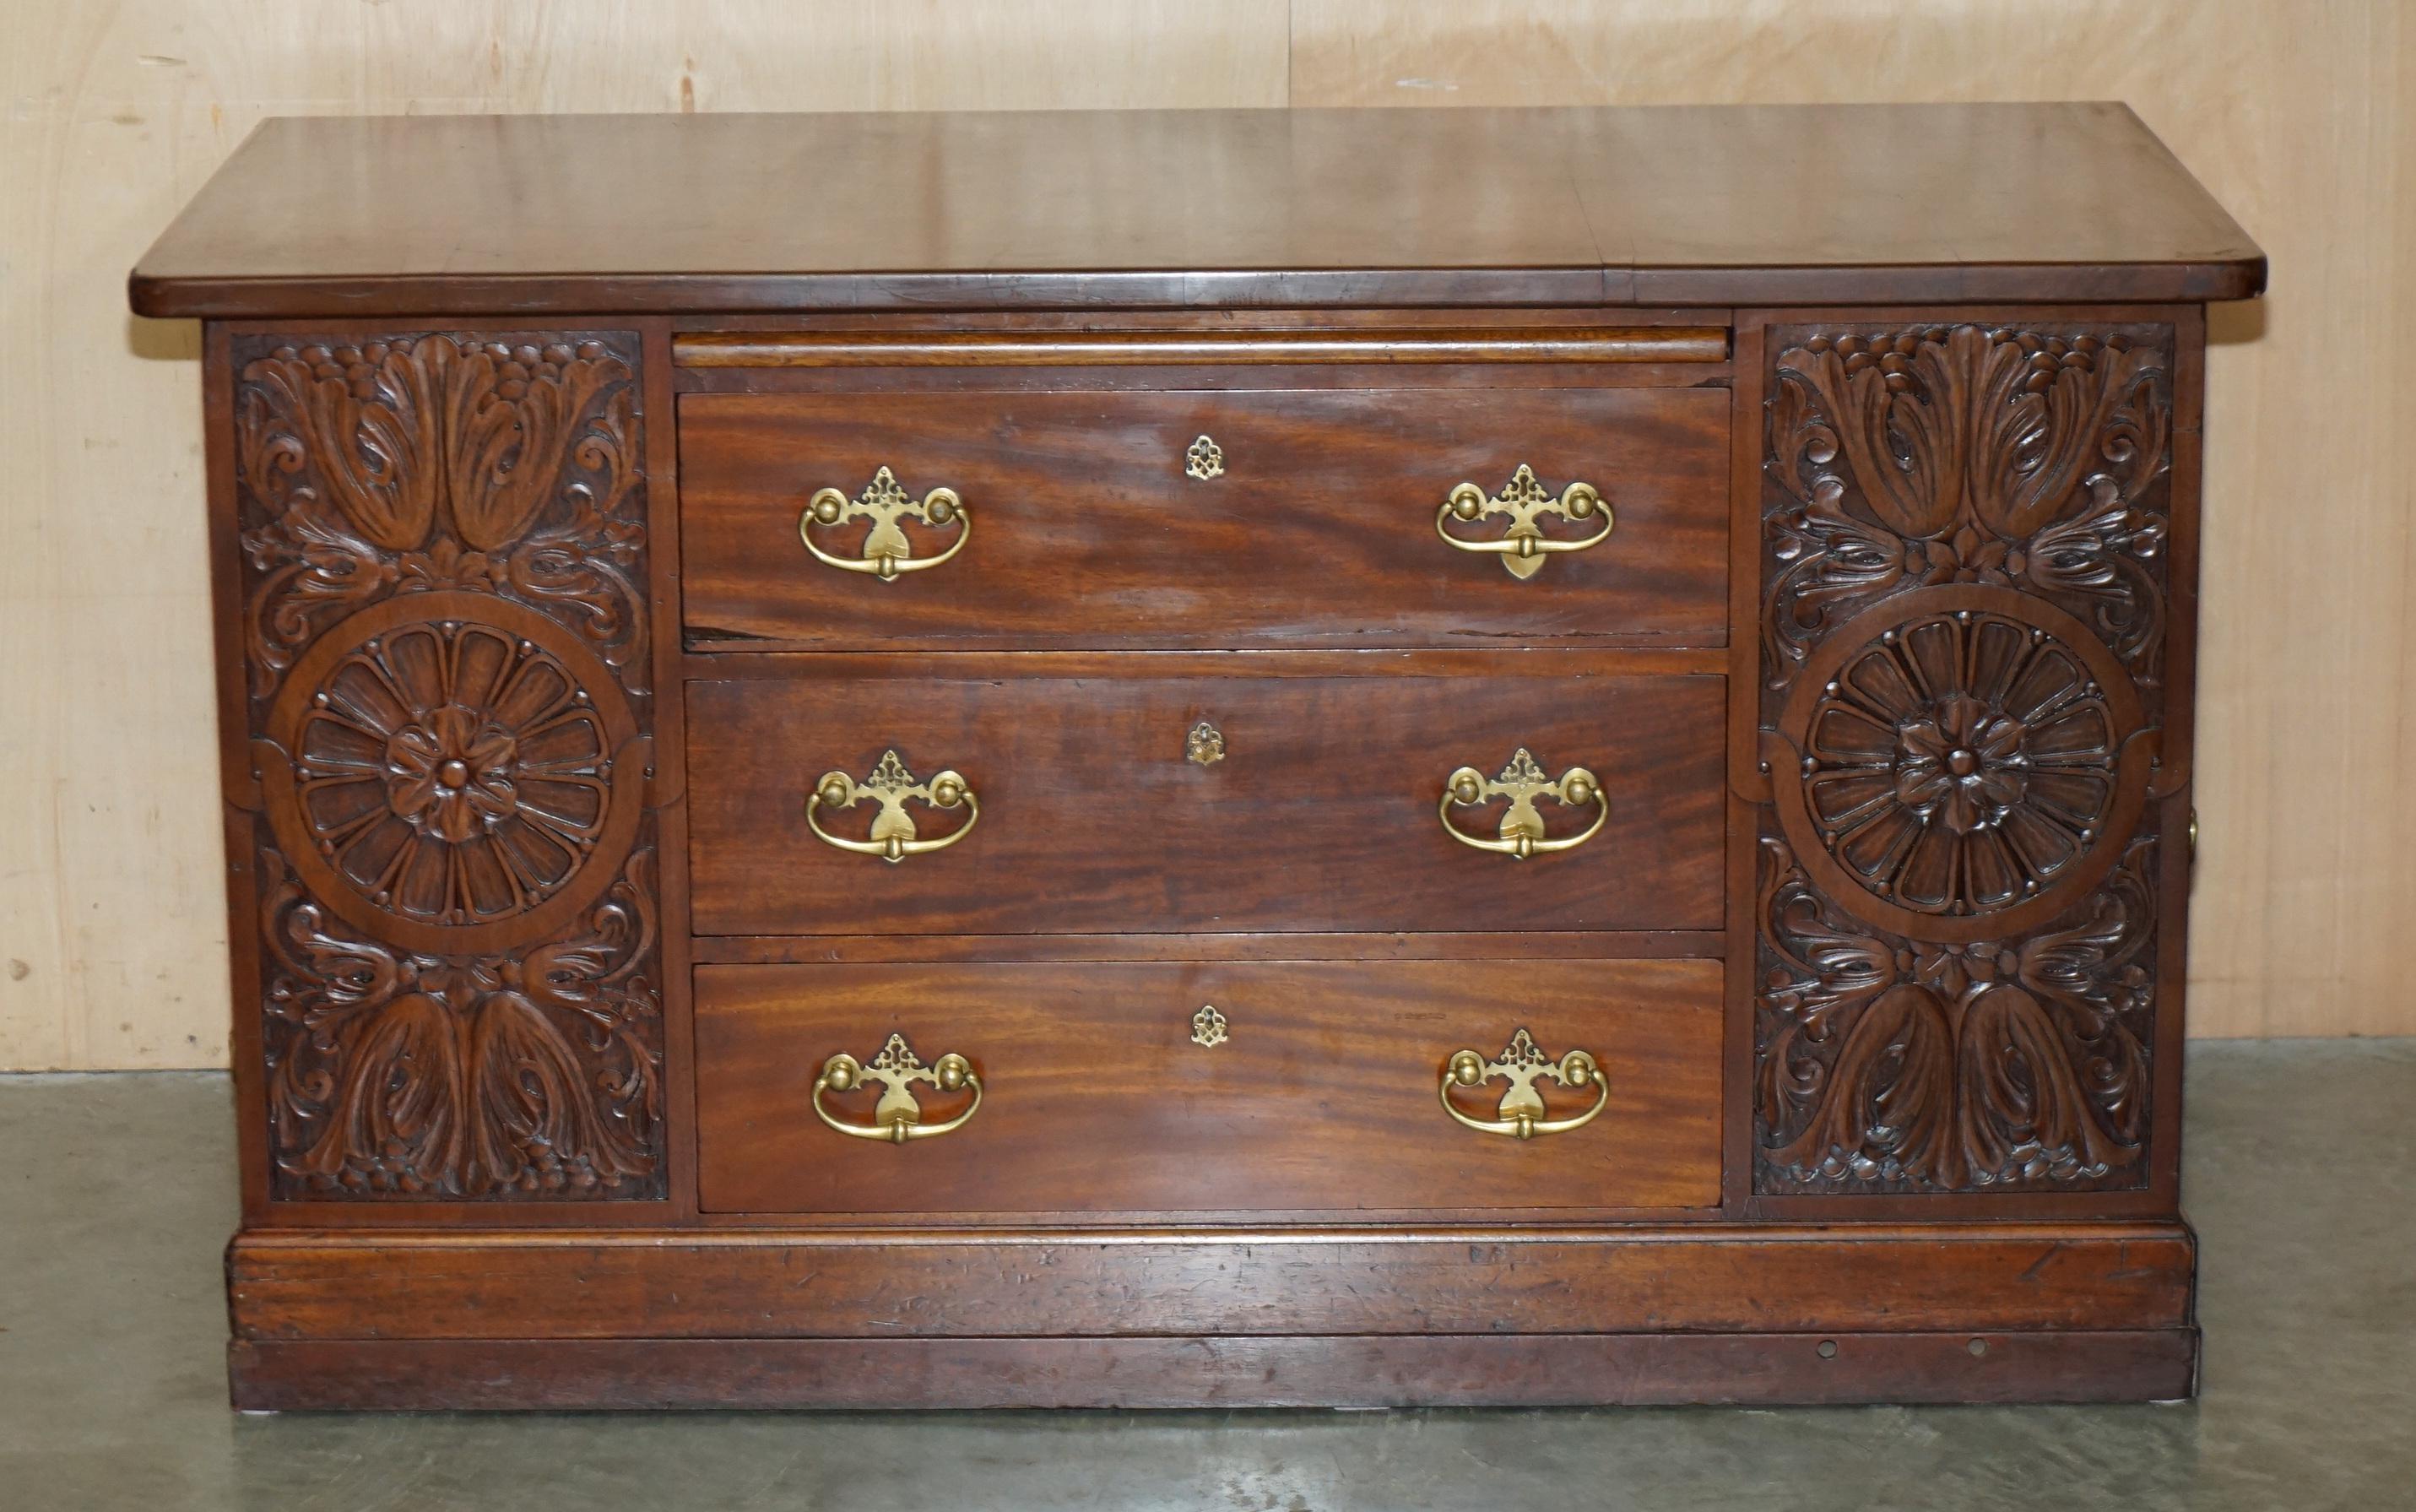 RIESIGE ANTIQUE VICTORIAN THOMAS CHIPPENDALE ESTATE DESK OR TWO SIDEBOARD DRAWERs im Angebot 8